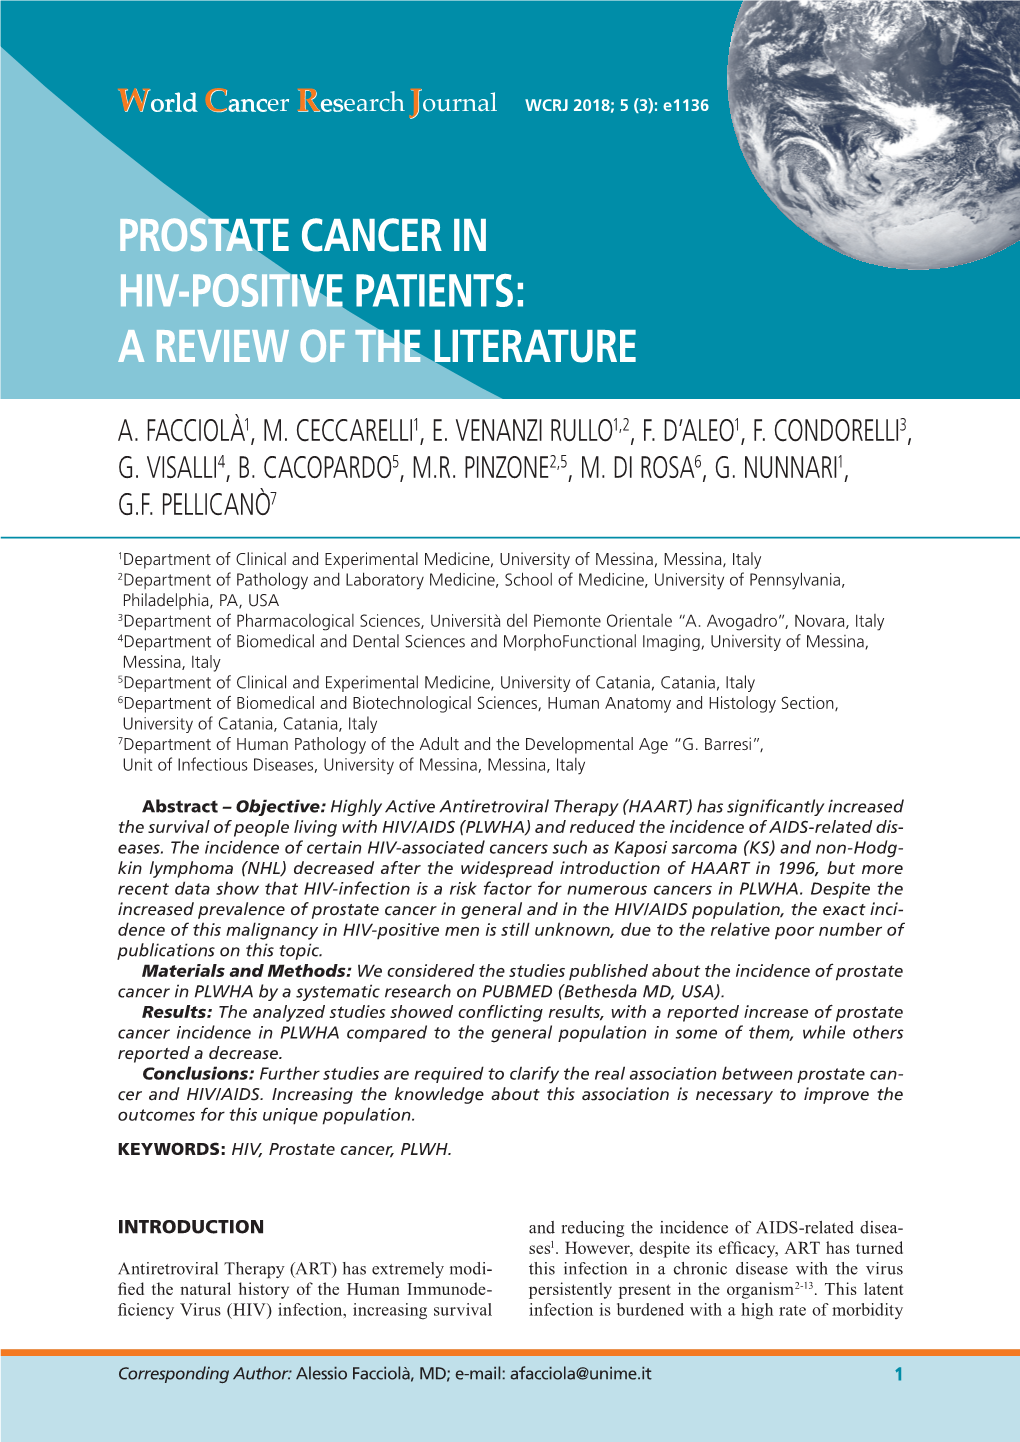 Prostate Cancer in Hiv-Positive Patients: a Review of the Literature